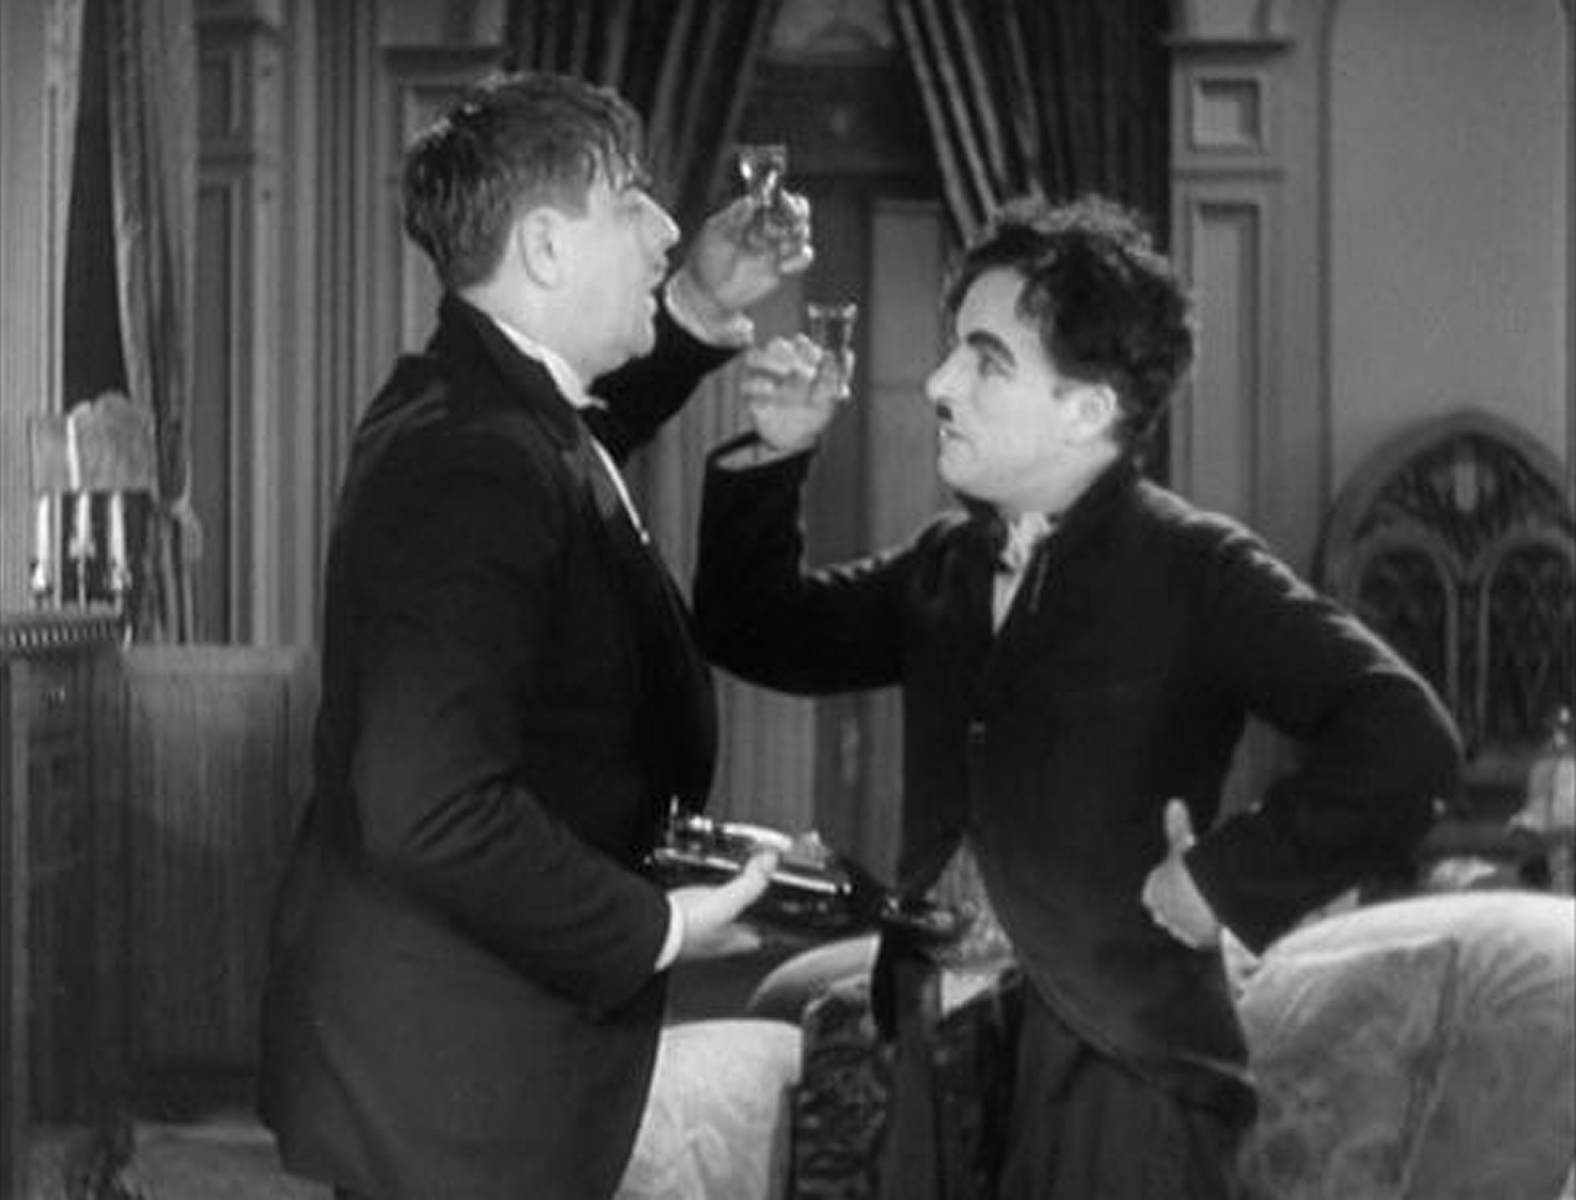 Charles Chaplin and Harry Myers in “City Lights” (1931)